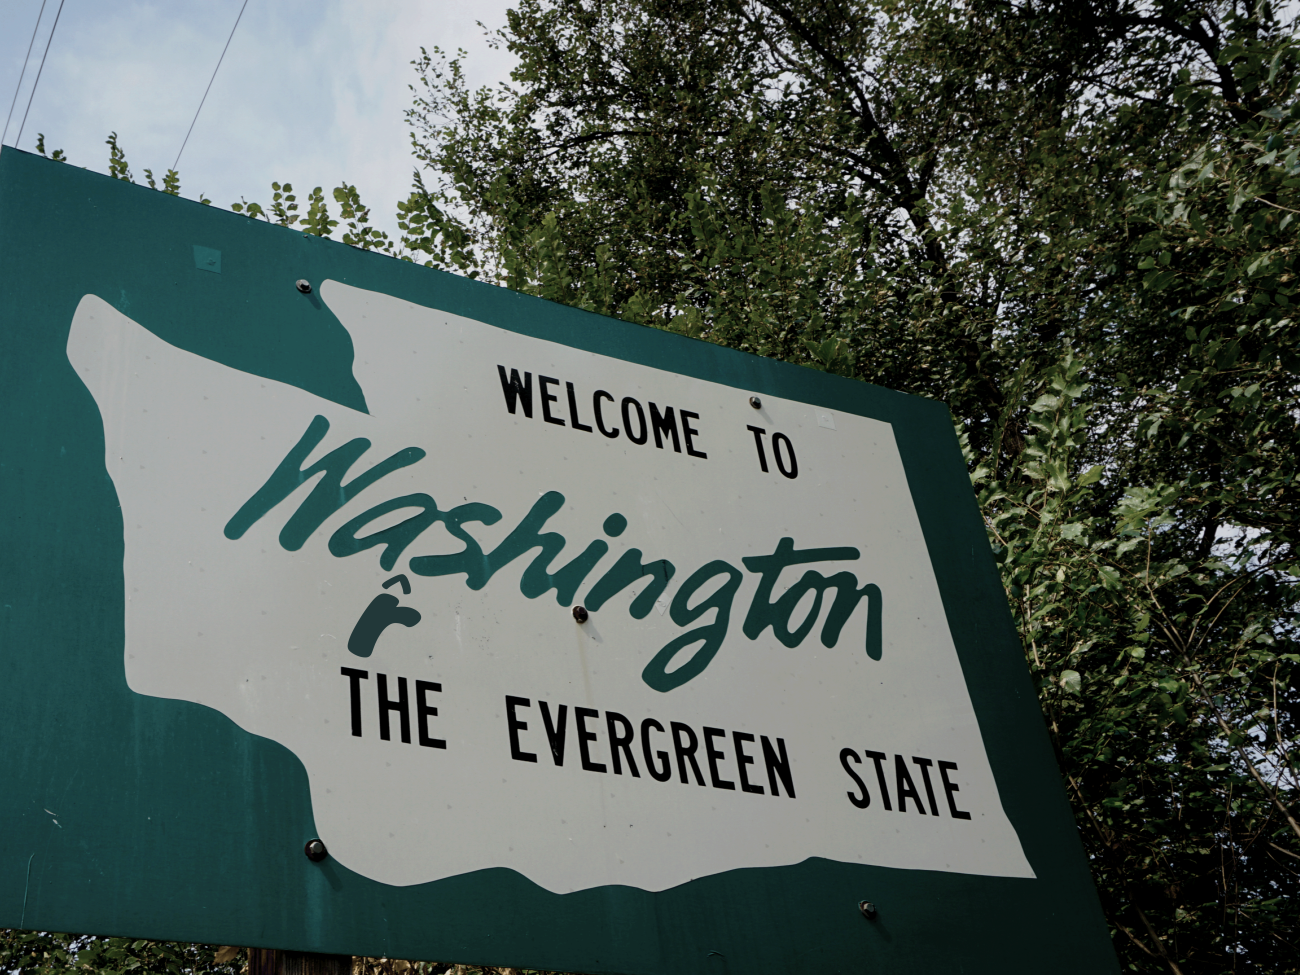 Linguistics Poster. Welcome to Washington (Warshington), the Evergreen State. See webpage for full description.